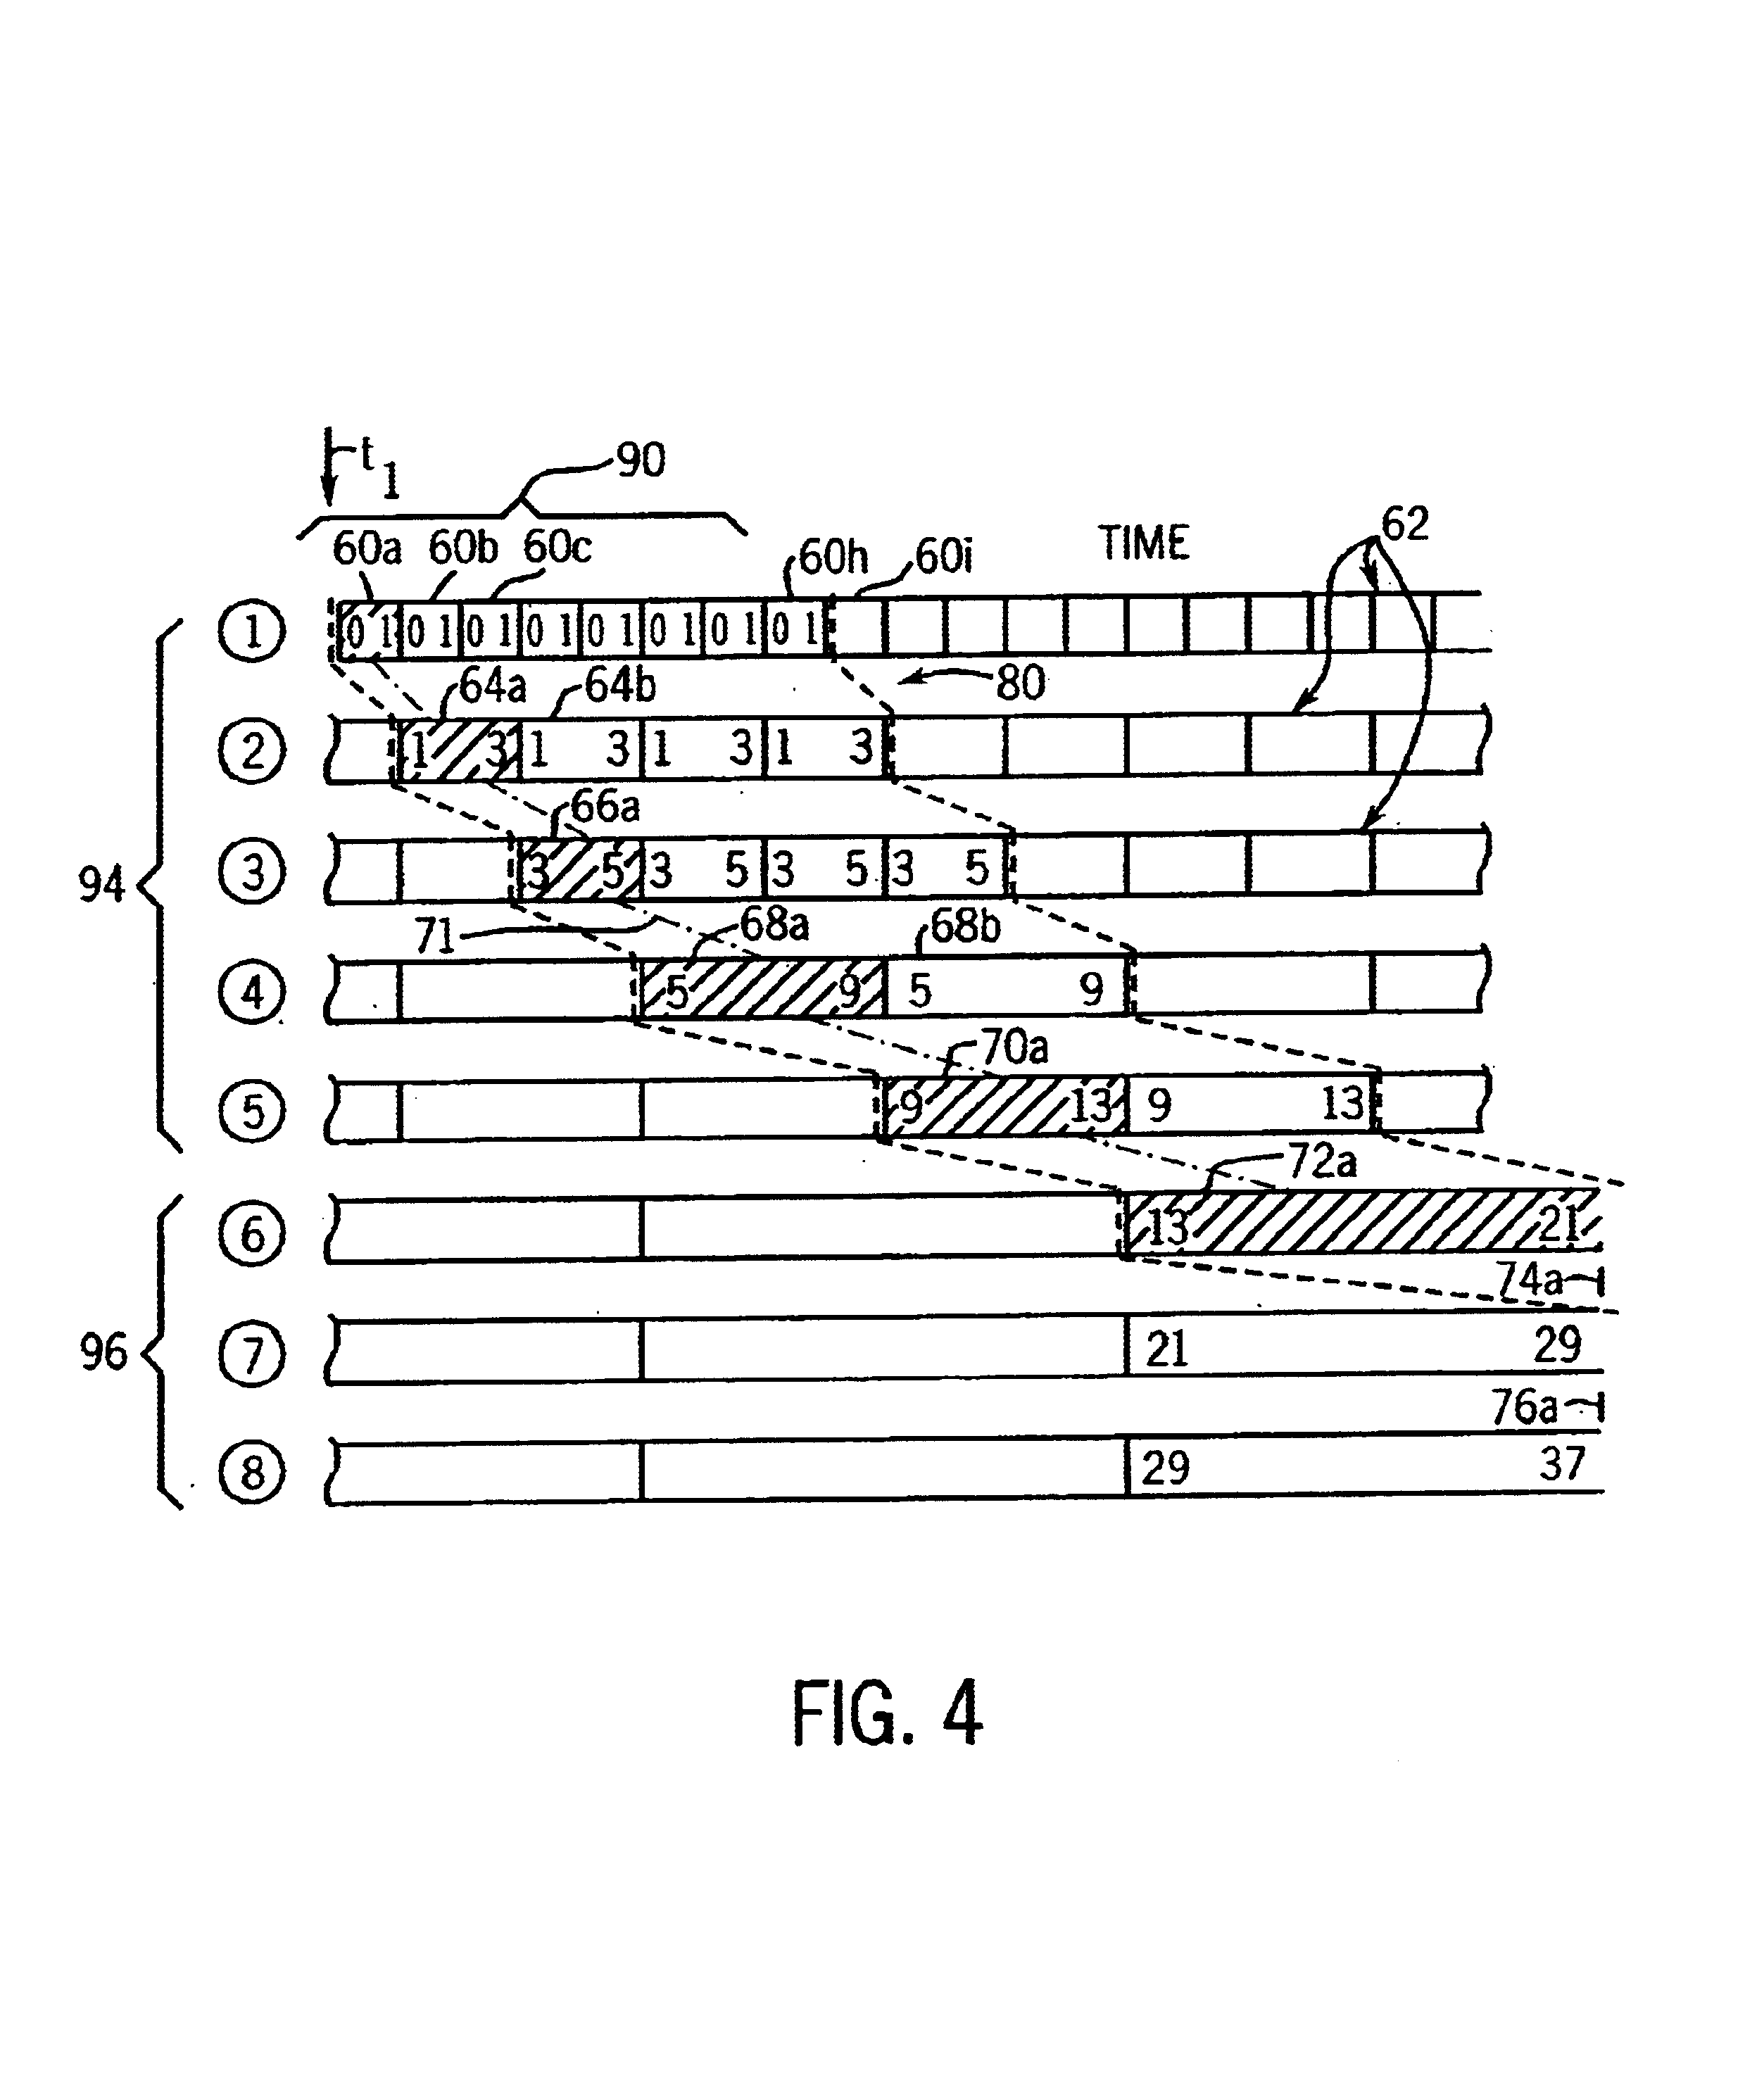 Method for caching of media files to reduce delivery cost